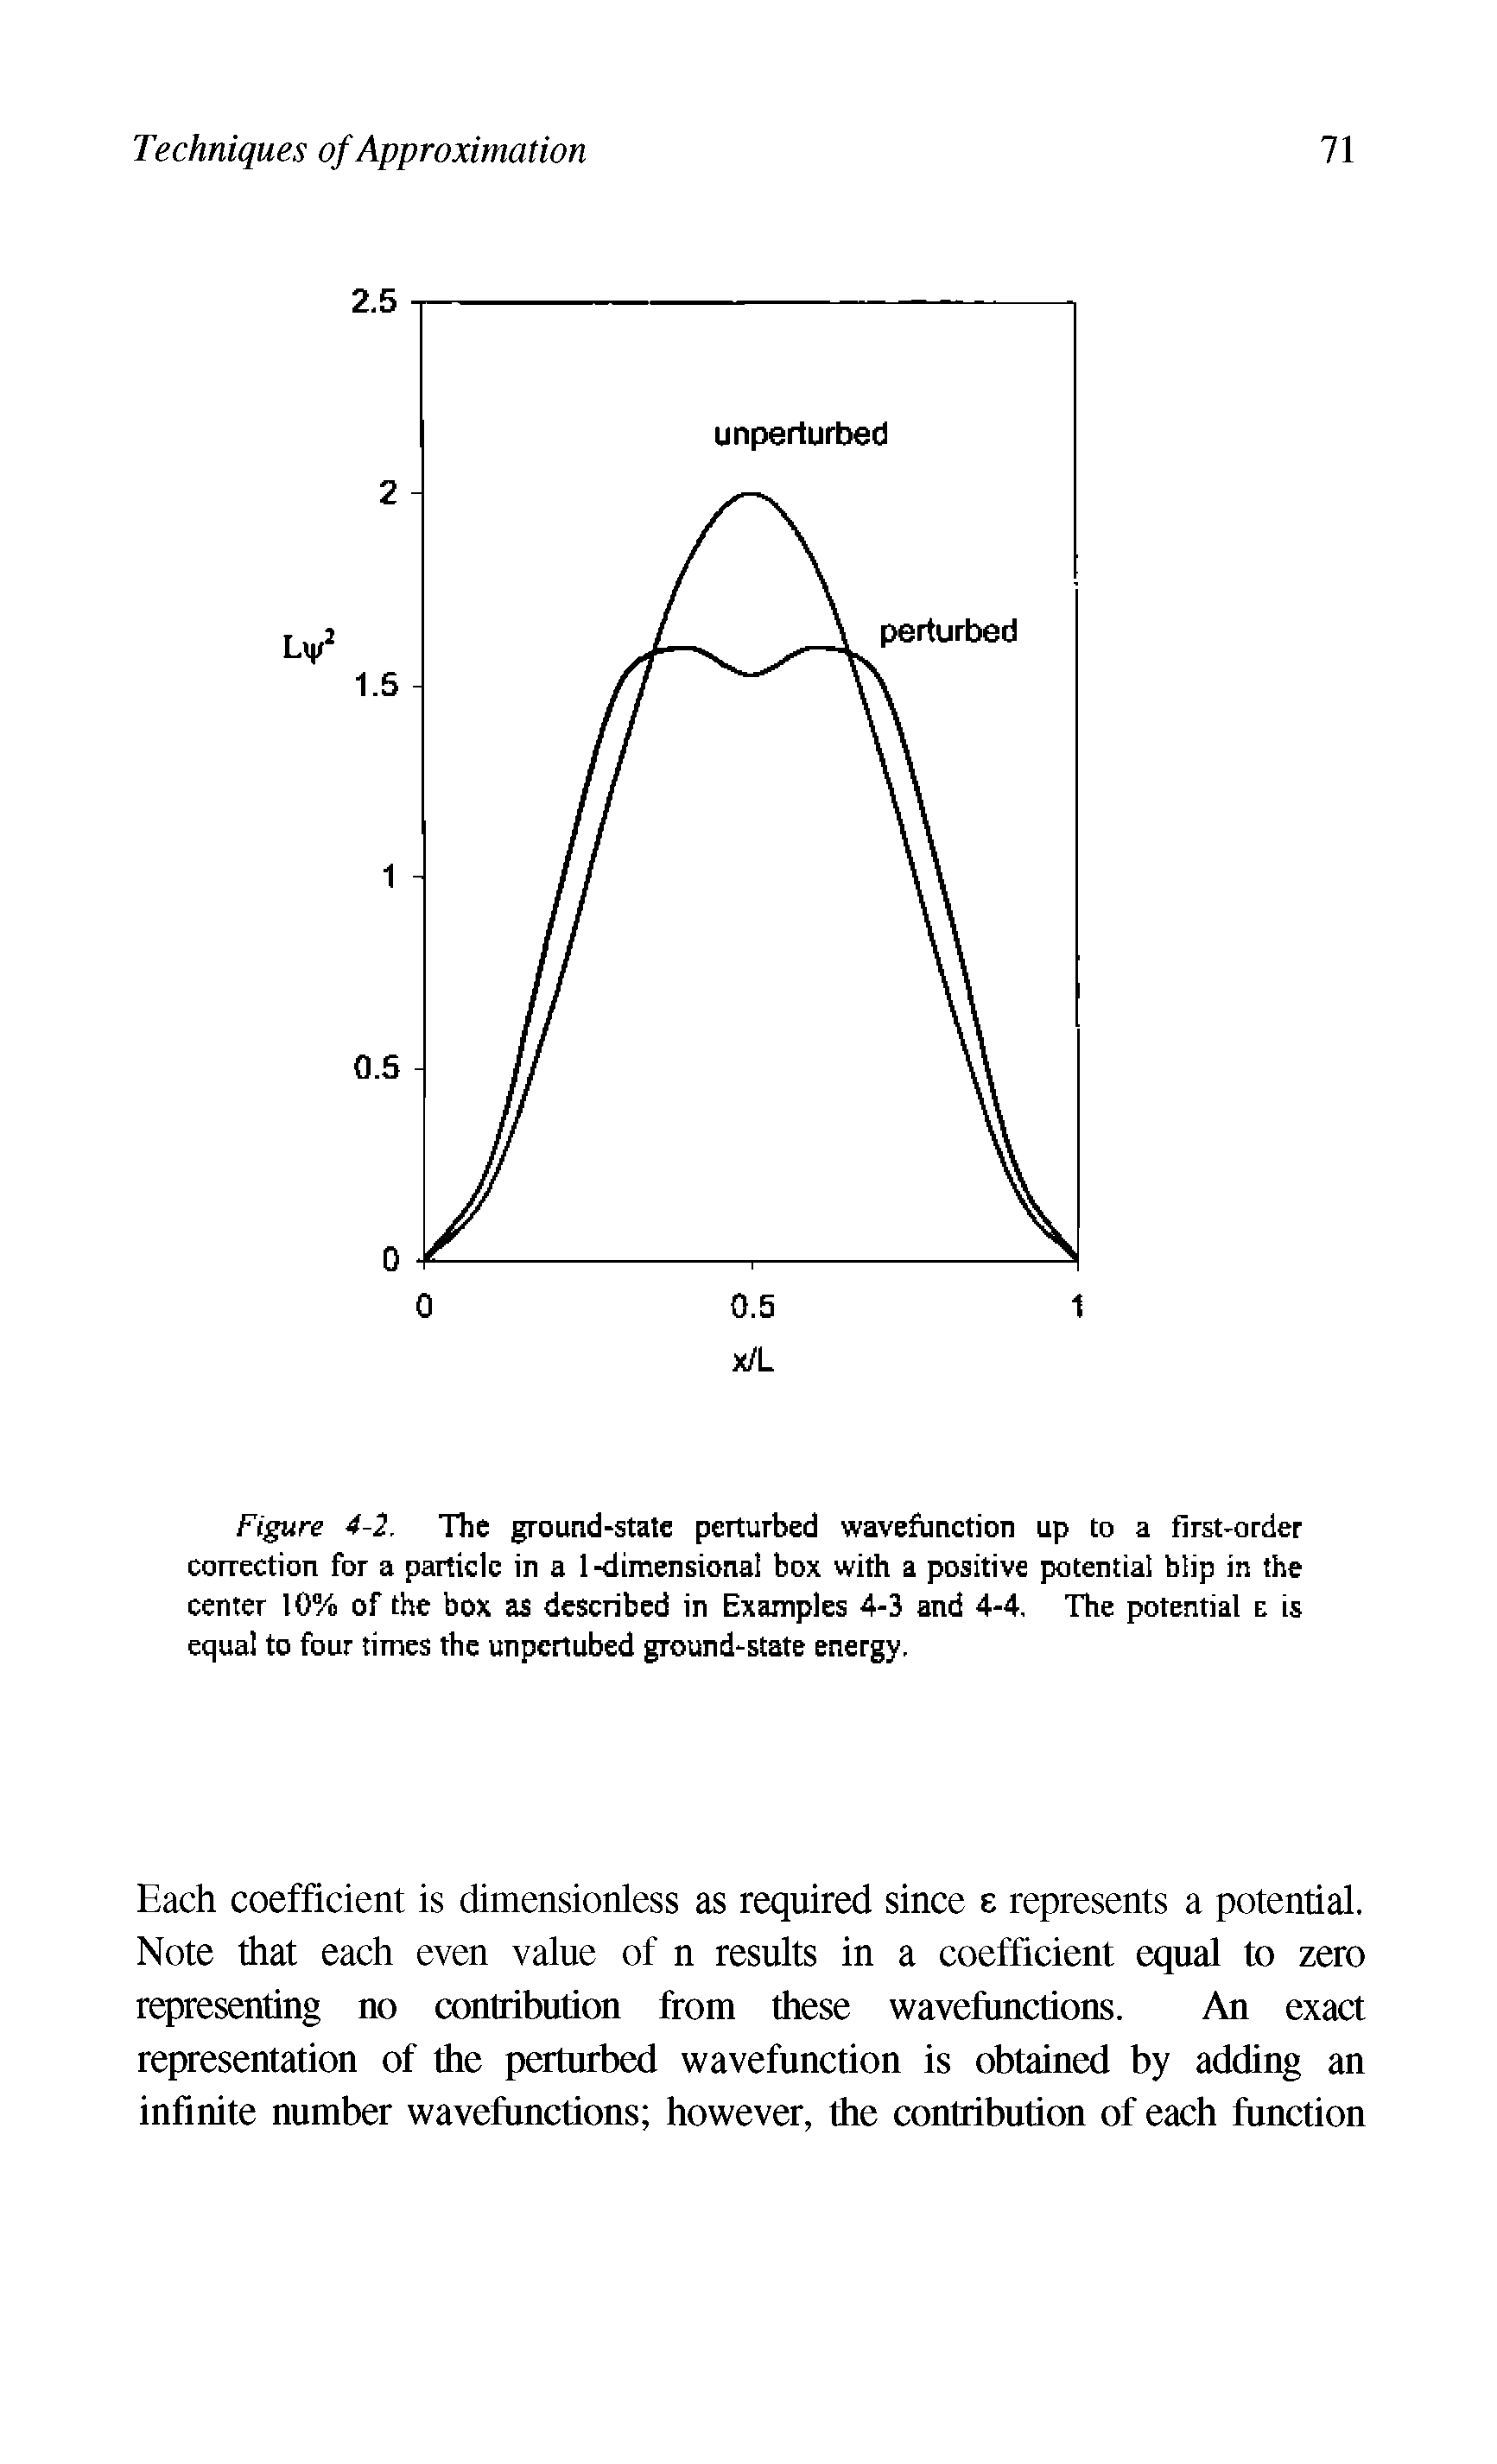 Figure 4-2. The ground-state perturbed wavefiinction up to a first-order correction for a particle in a 1 -dimensional box with a positive potential blip in the center 10% of the box as described in Examples 4-3 and 4-4, The potential e is equal to four times the unpertubed ground-state energy.